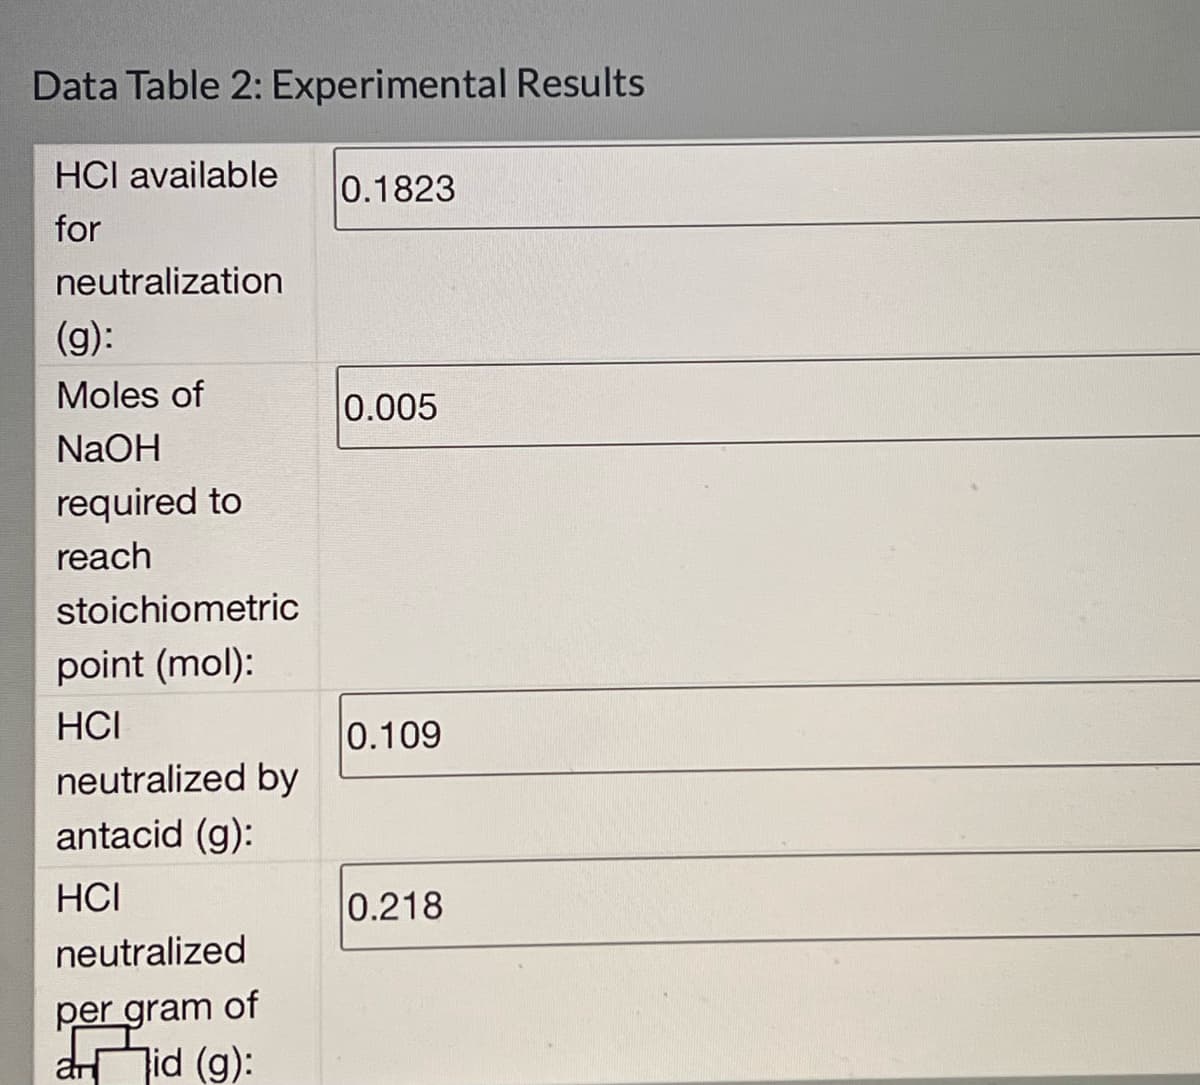 Data Table 2: Experimental Results
HCI available
0.1823
for
neutralization
(g):
Moles of
0.005
NaOH
reach
required to
stoichiometric
point (mol):
HCI
0.109
neutralized by
antacid (g):
HCI
0.218
neutralized
per gram of
aid (g):